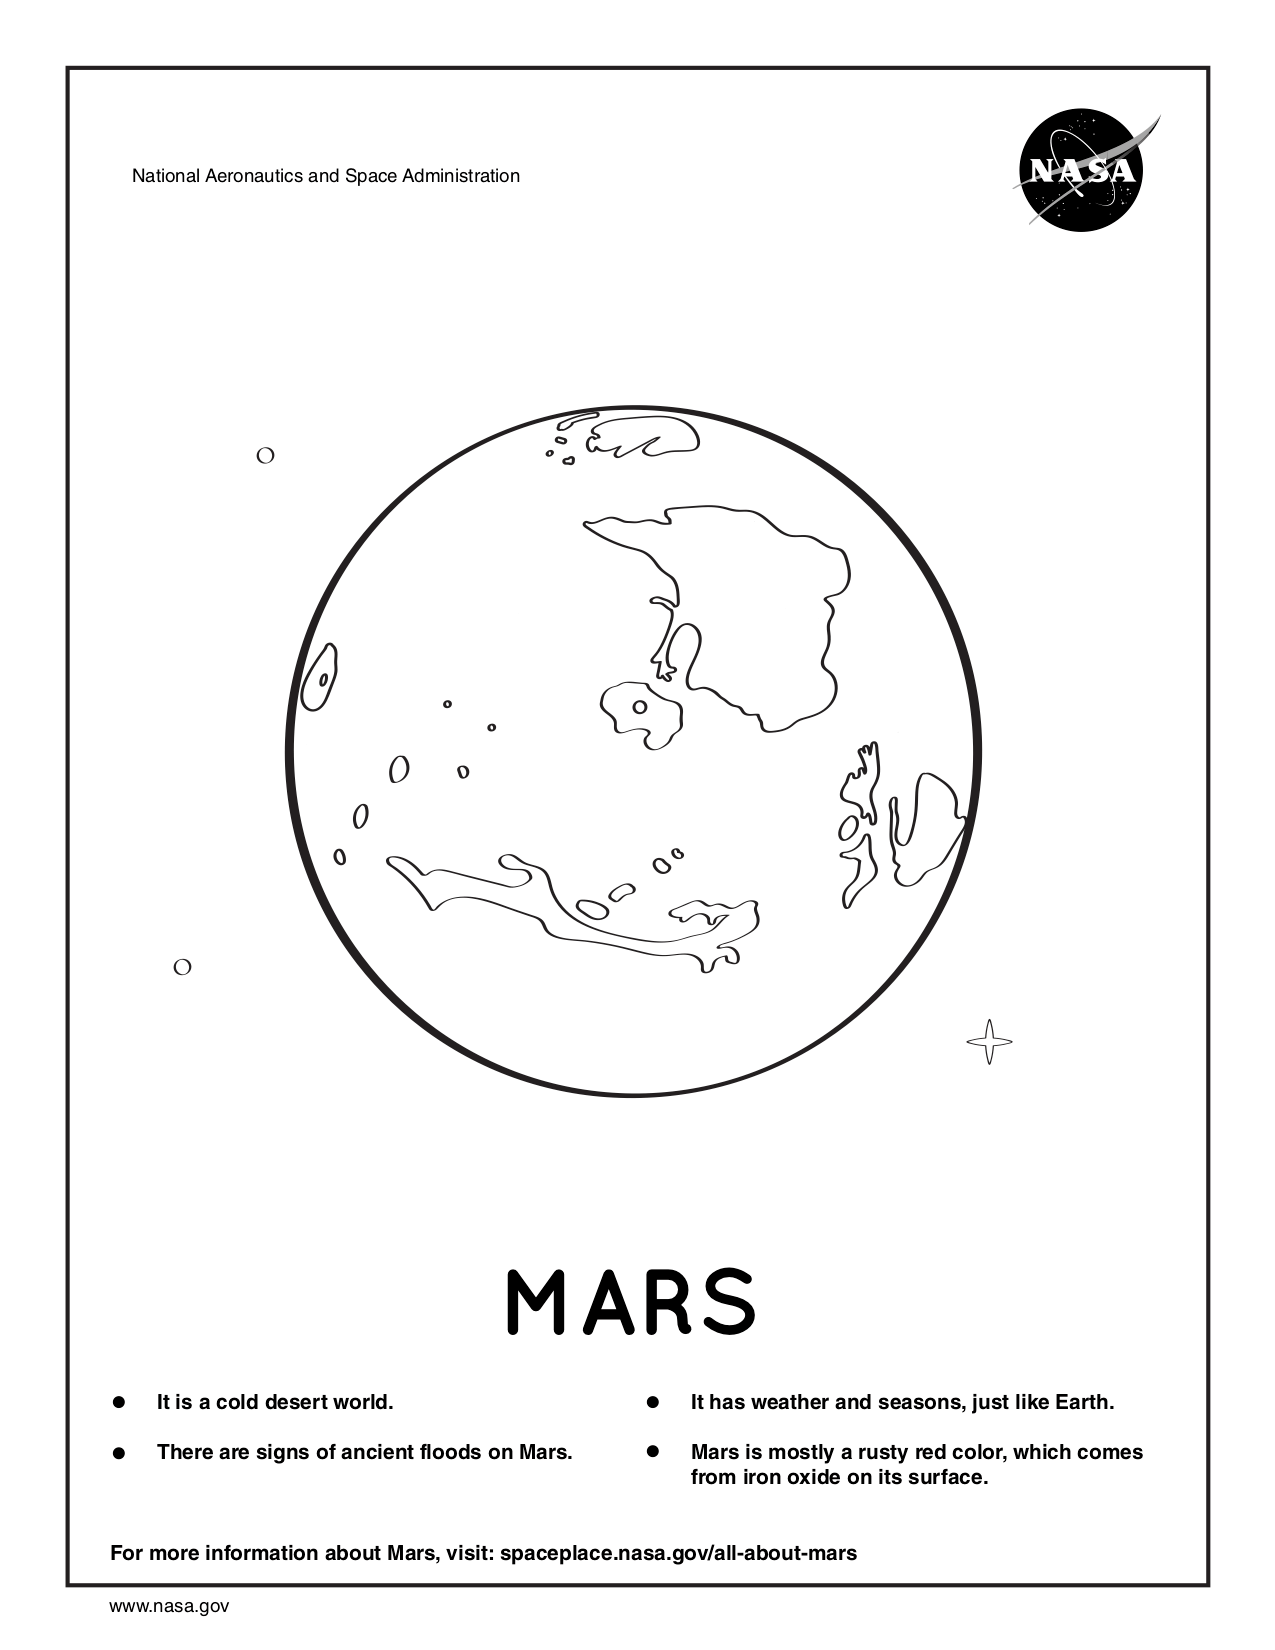 Coloring page for Mars.